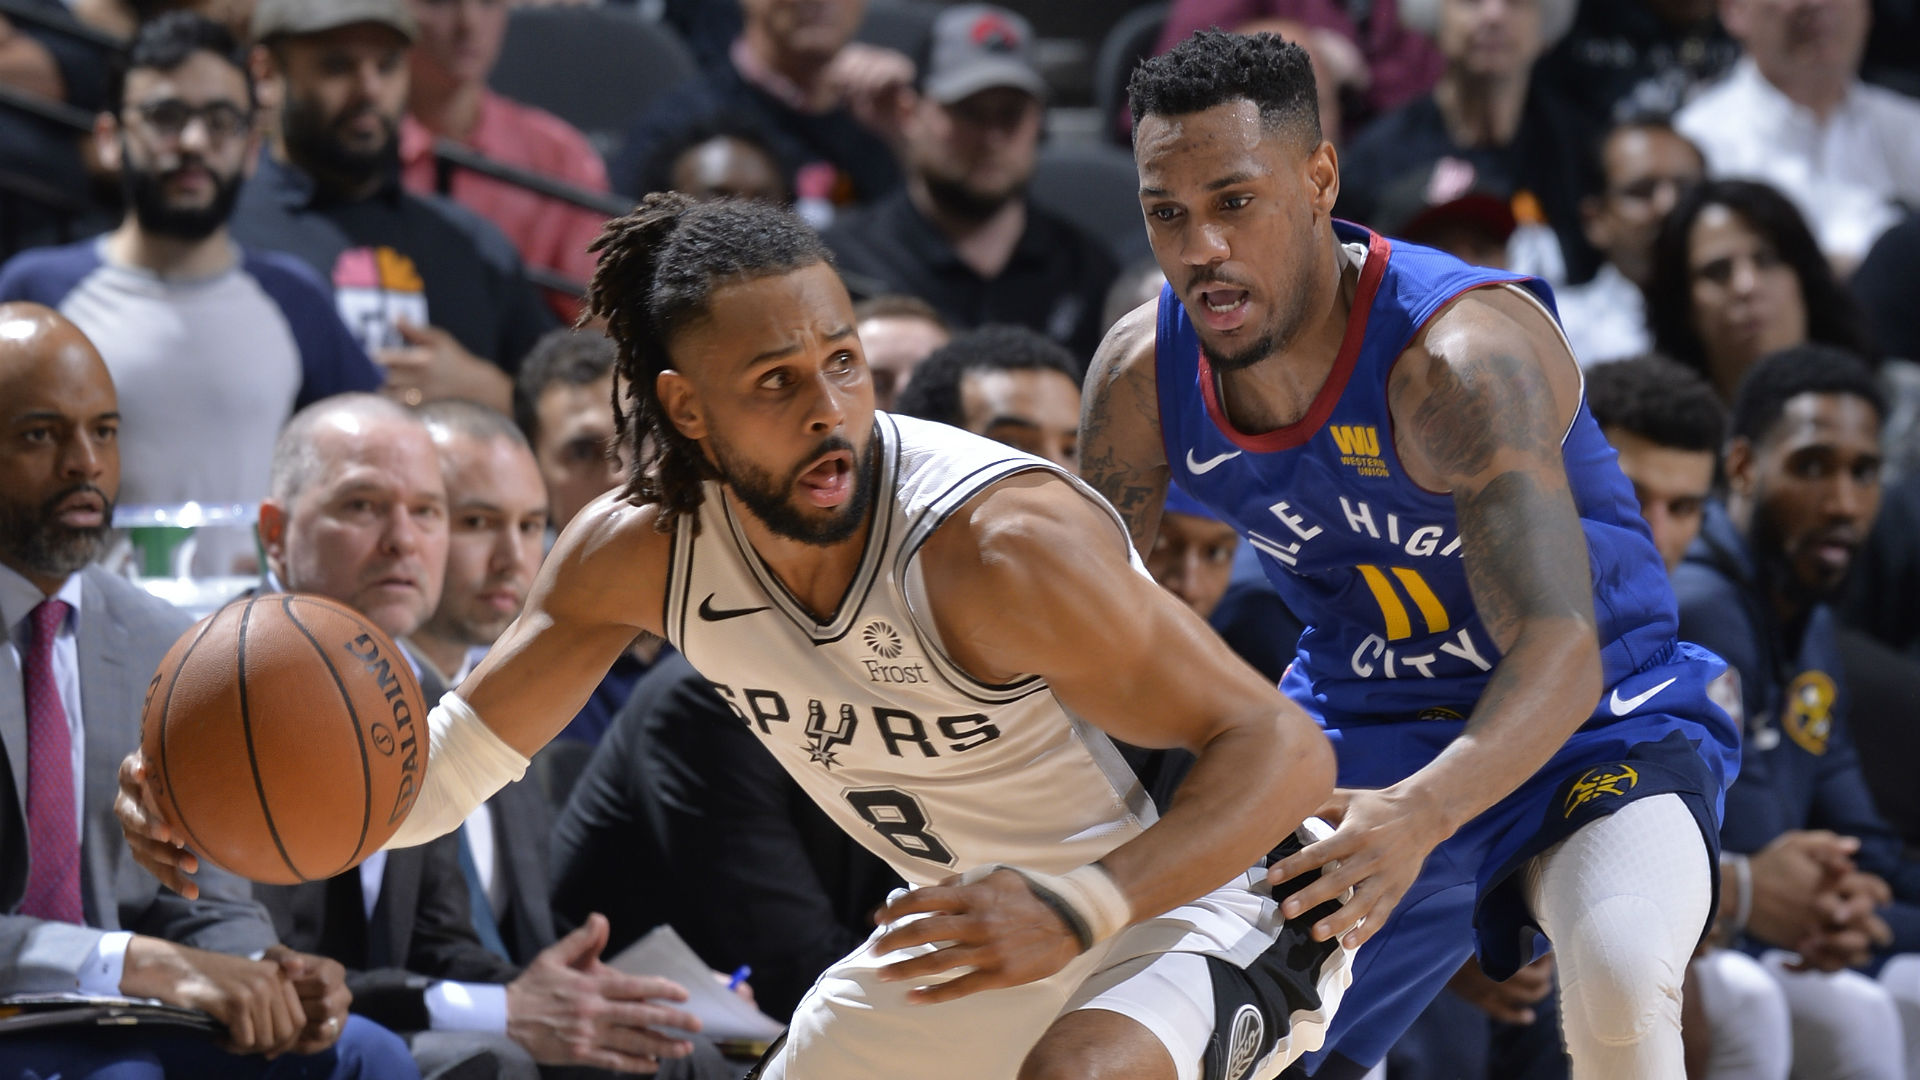 NBA Playoffs 2019: Live updates from 76ers-Nets, Nuggets-Spurs, Bucks-Pistons and ...